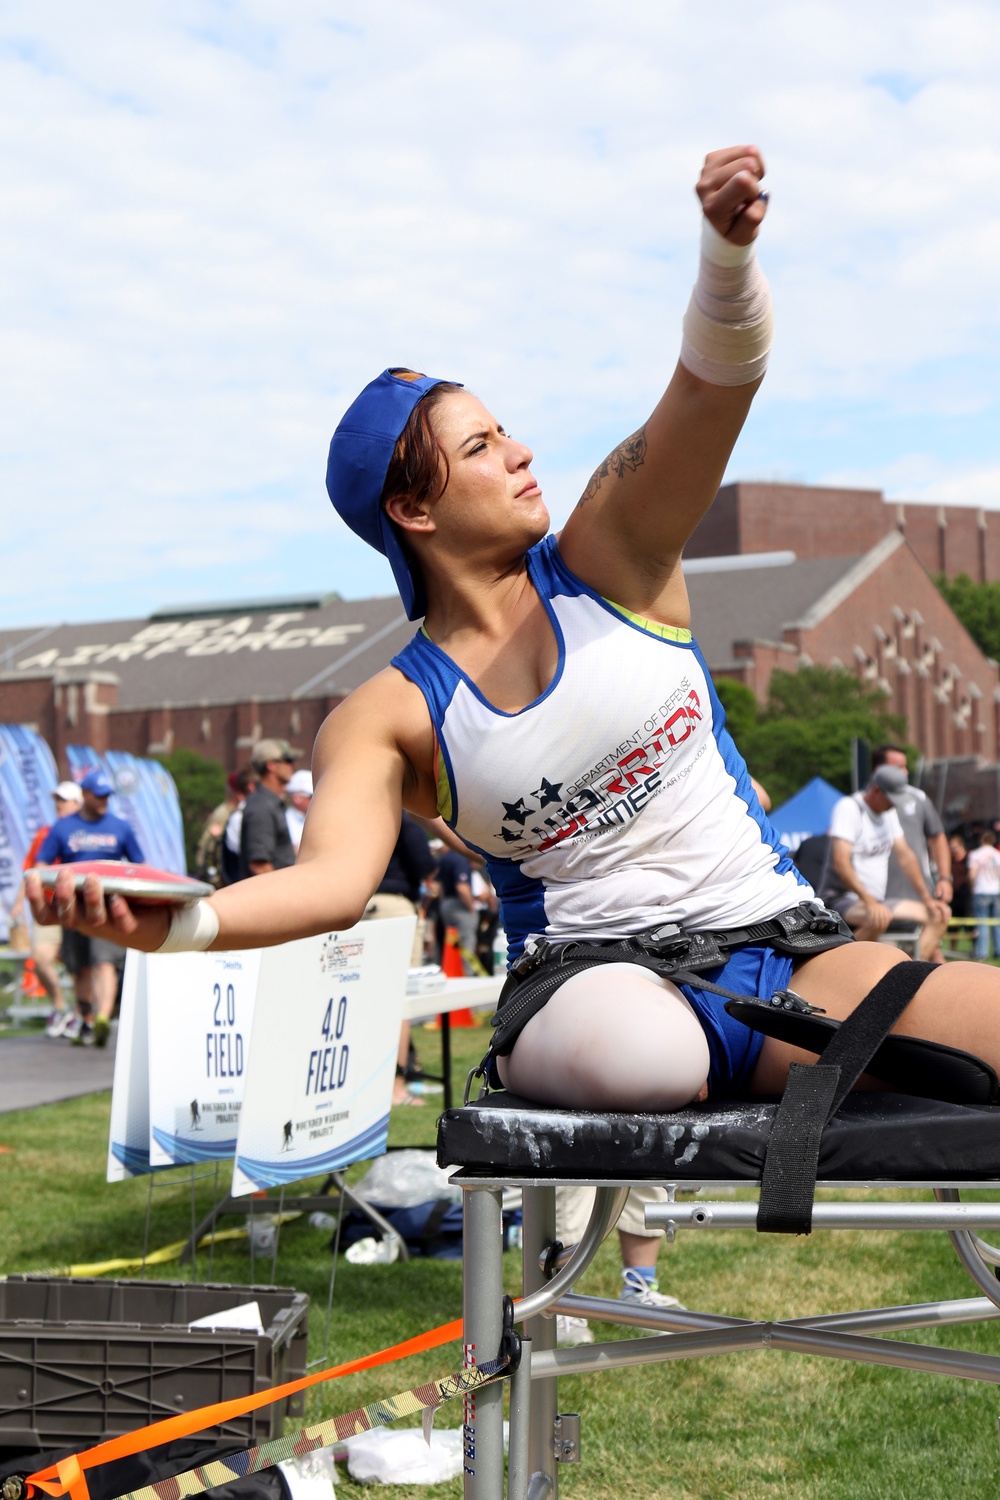 Team Air Force competes at Warrior Games